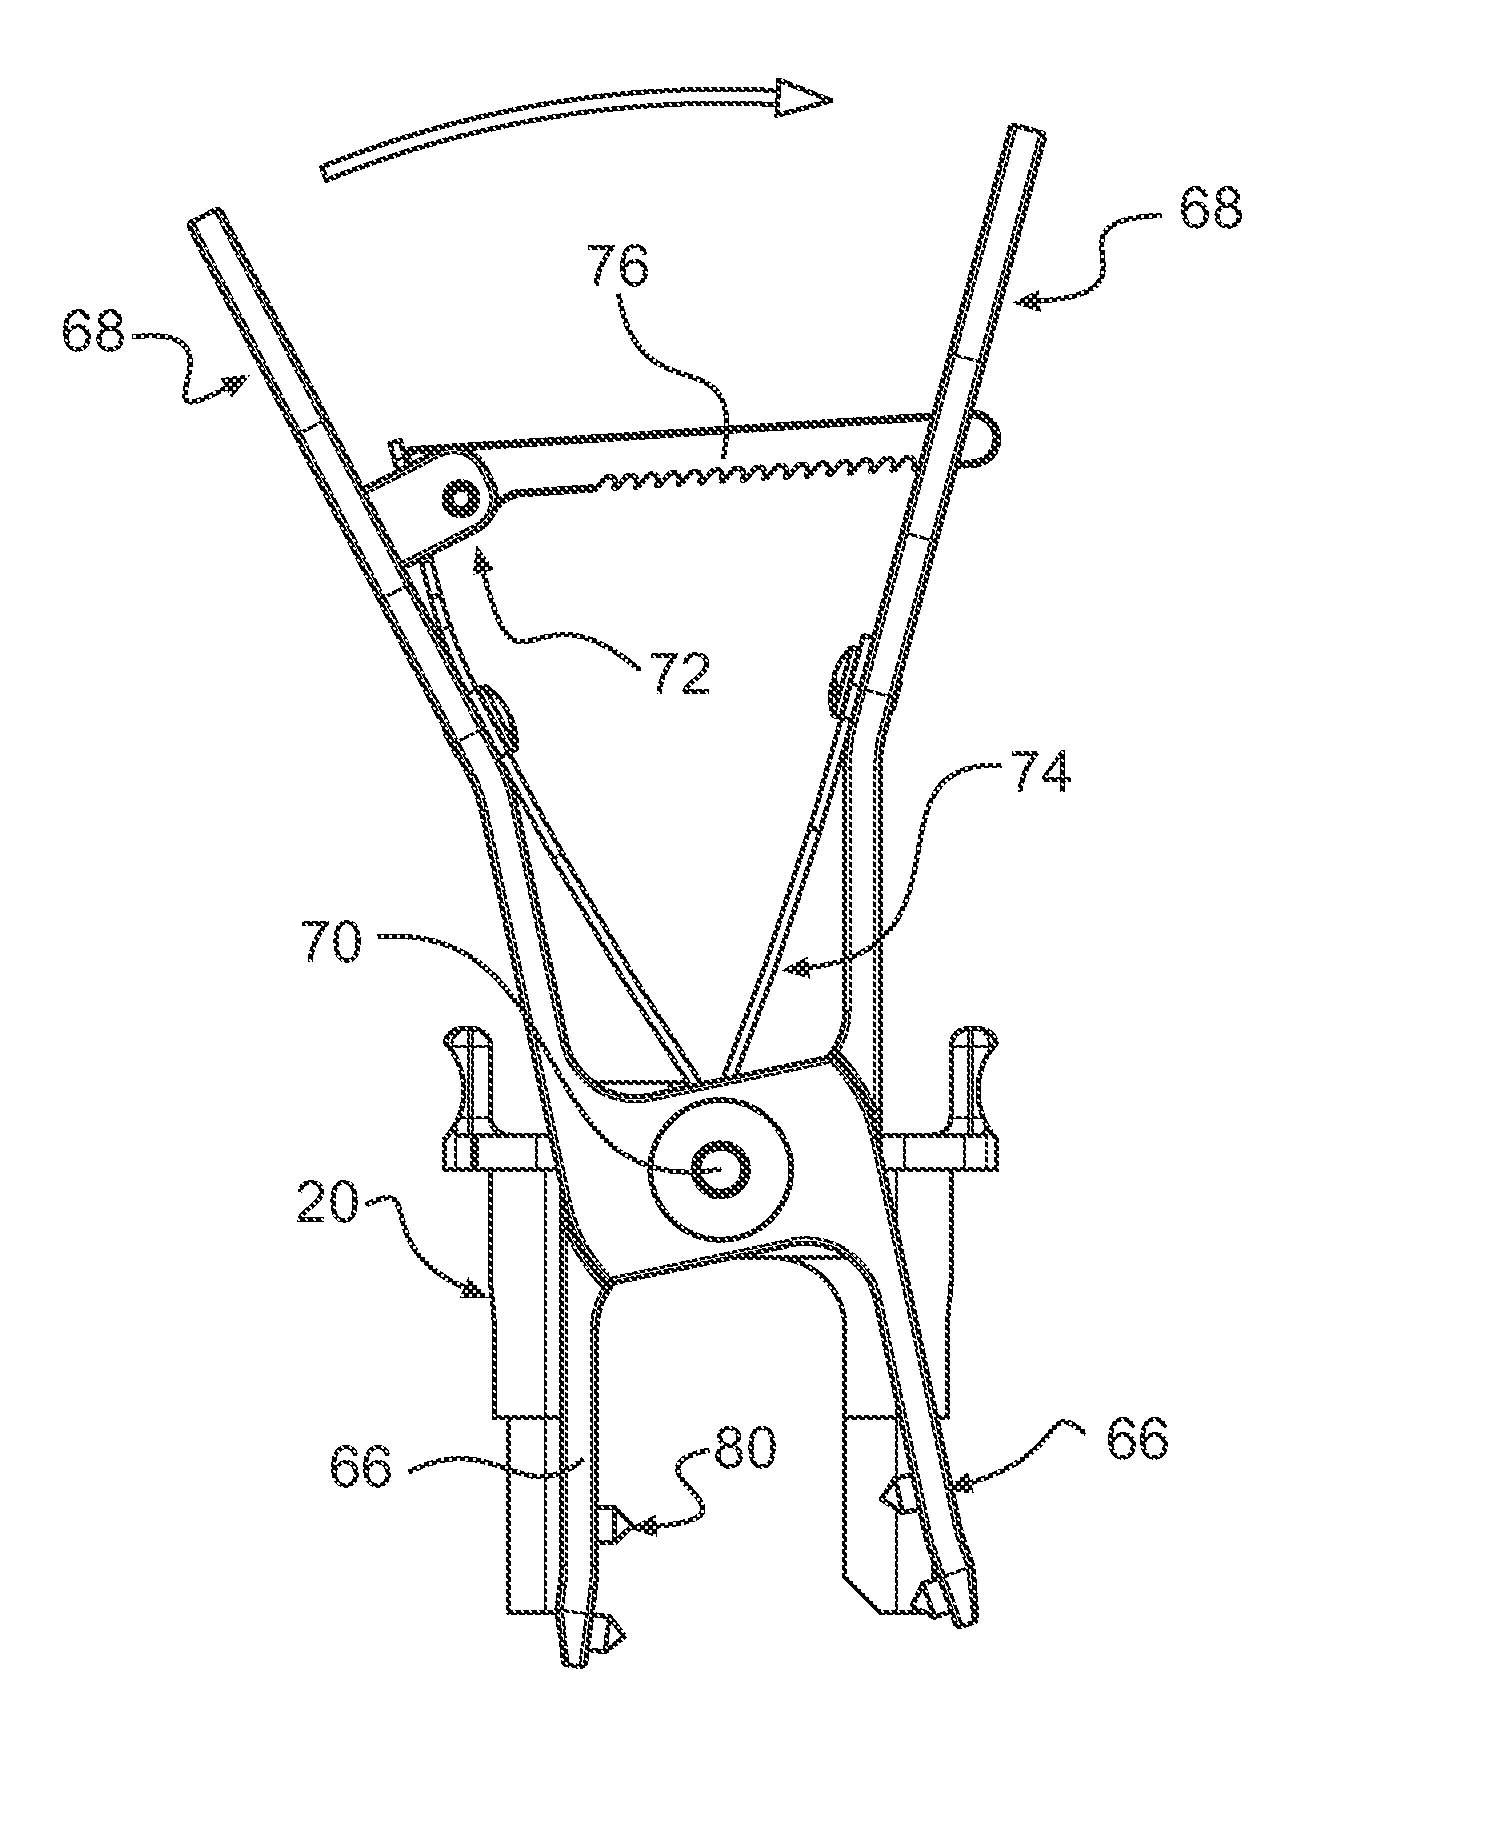 Method and system for performing interspinous space preparation for receiving an implant